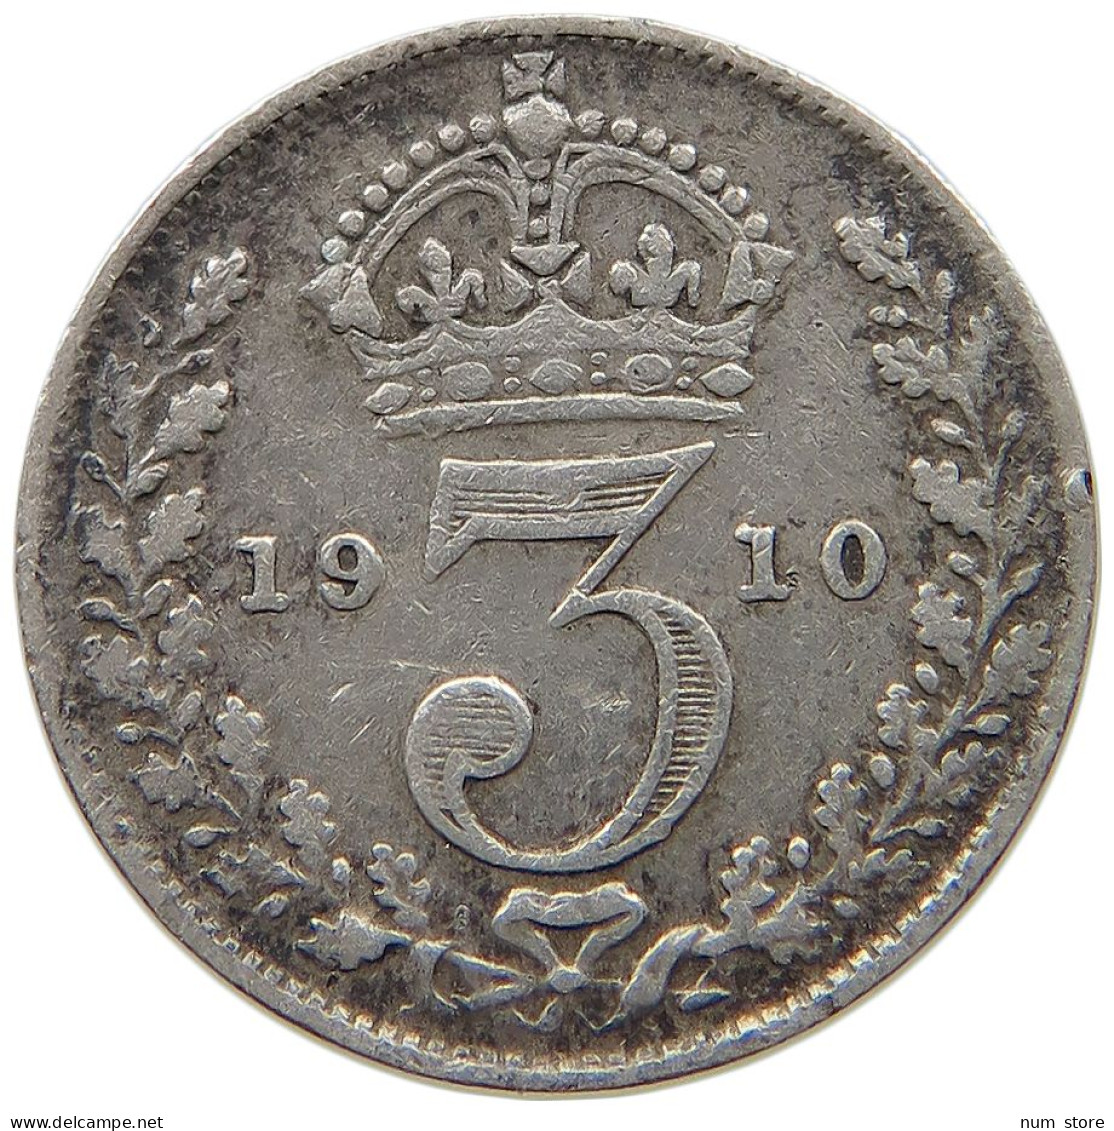 GREAT BRITAIN THREEPENCE 1910 #a033 0173 - F. 3 Pence